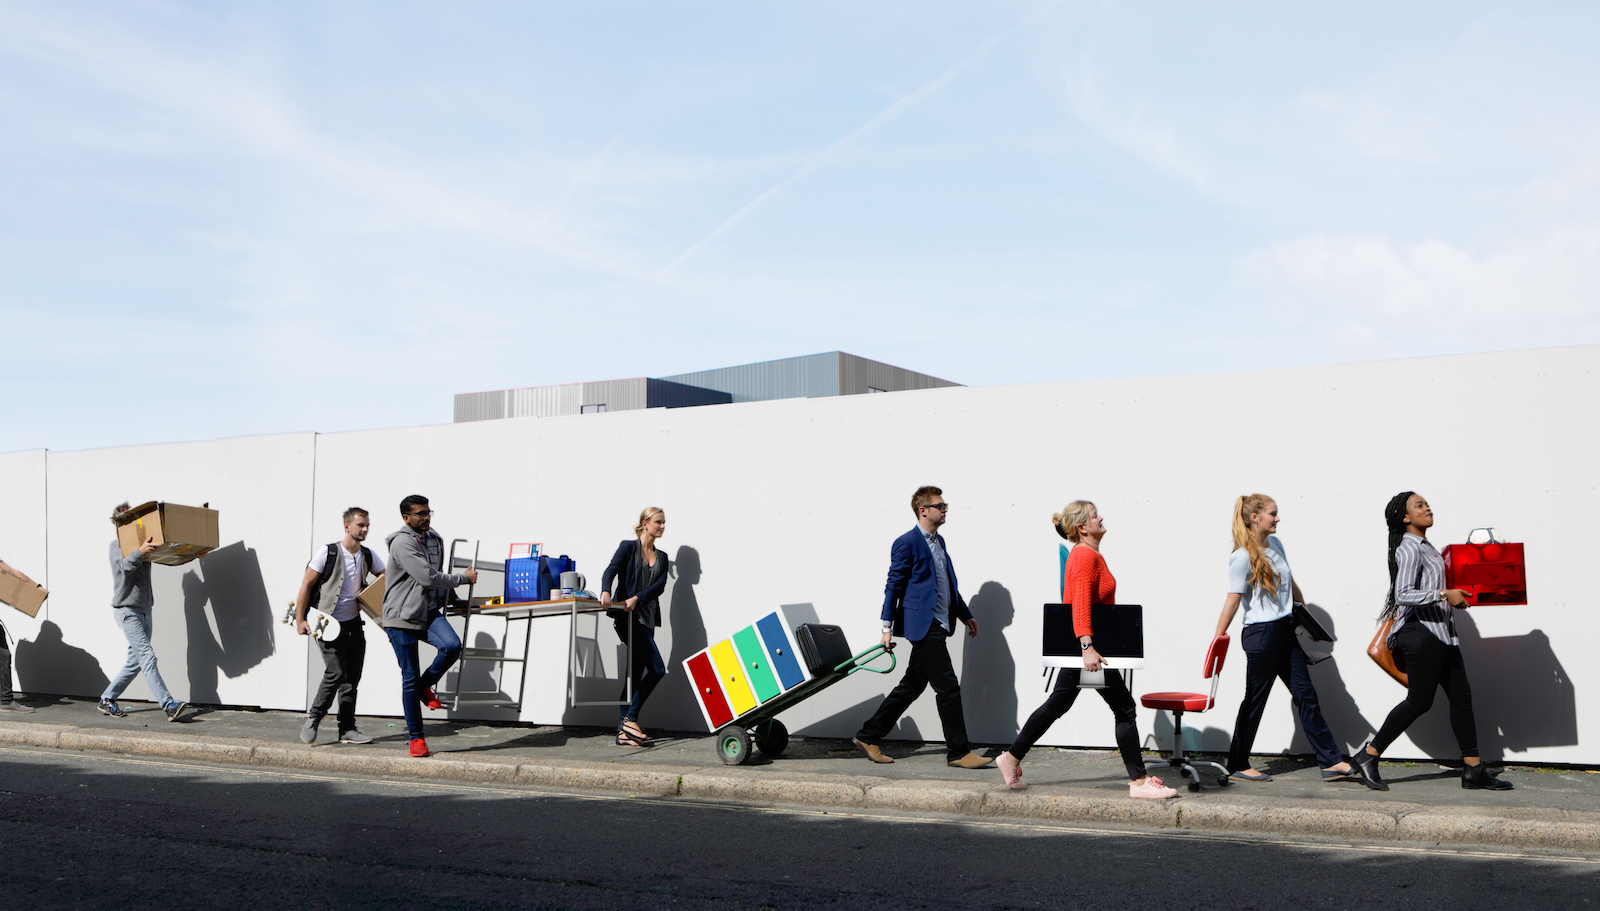 Office workers walking in a line on the street with office equipment